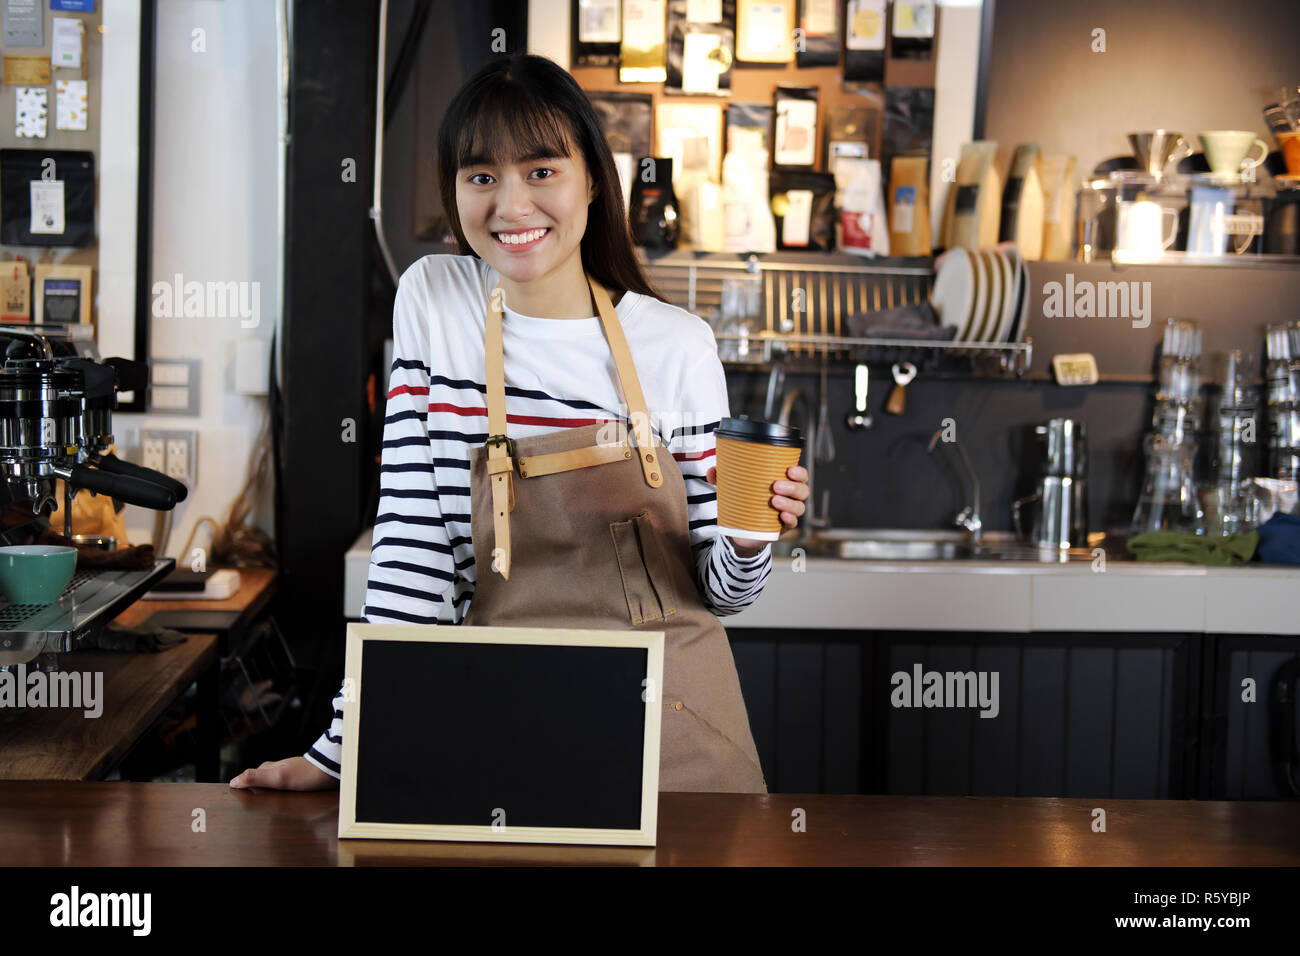 Smiling asian barista holding cup of coffee at counter in coffee shop. Cafe restaurant service, food and drink industry concept. Stock Photo